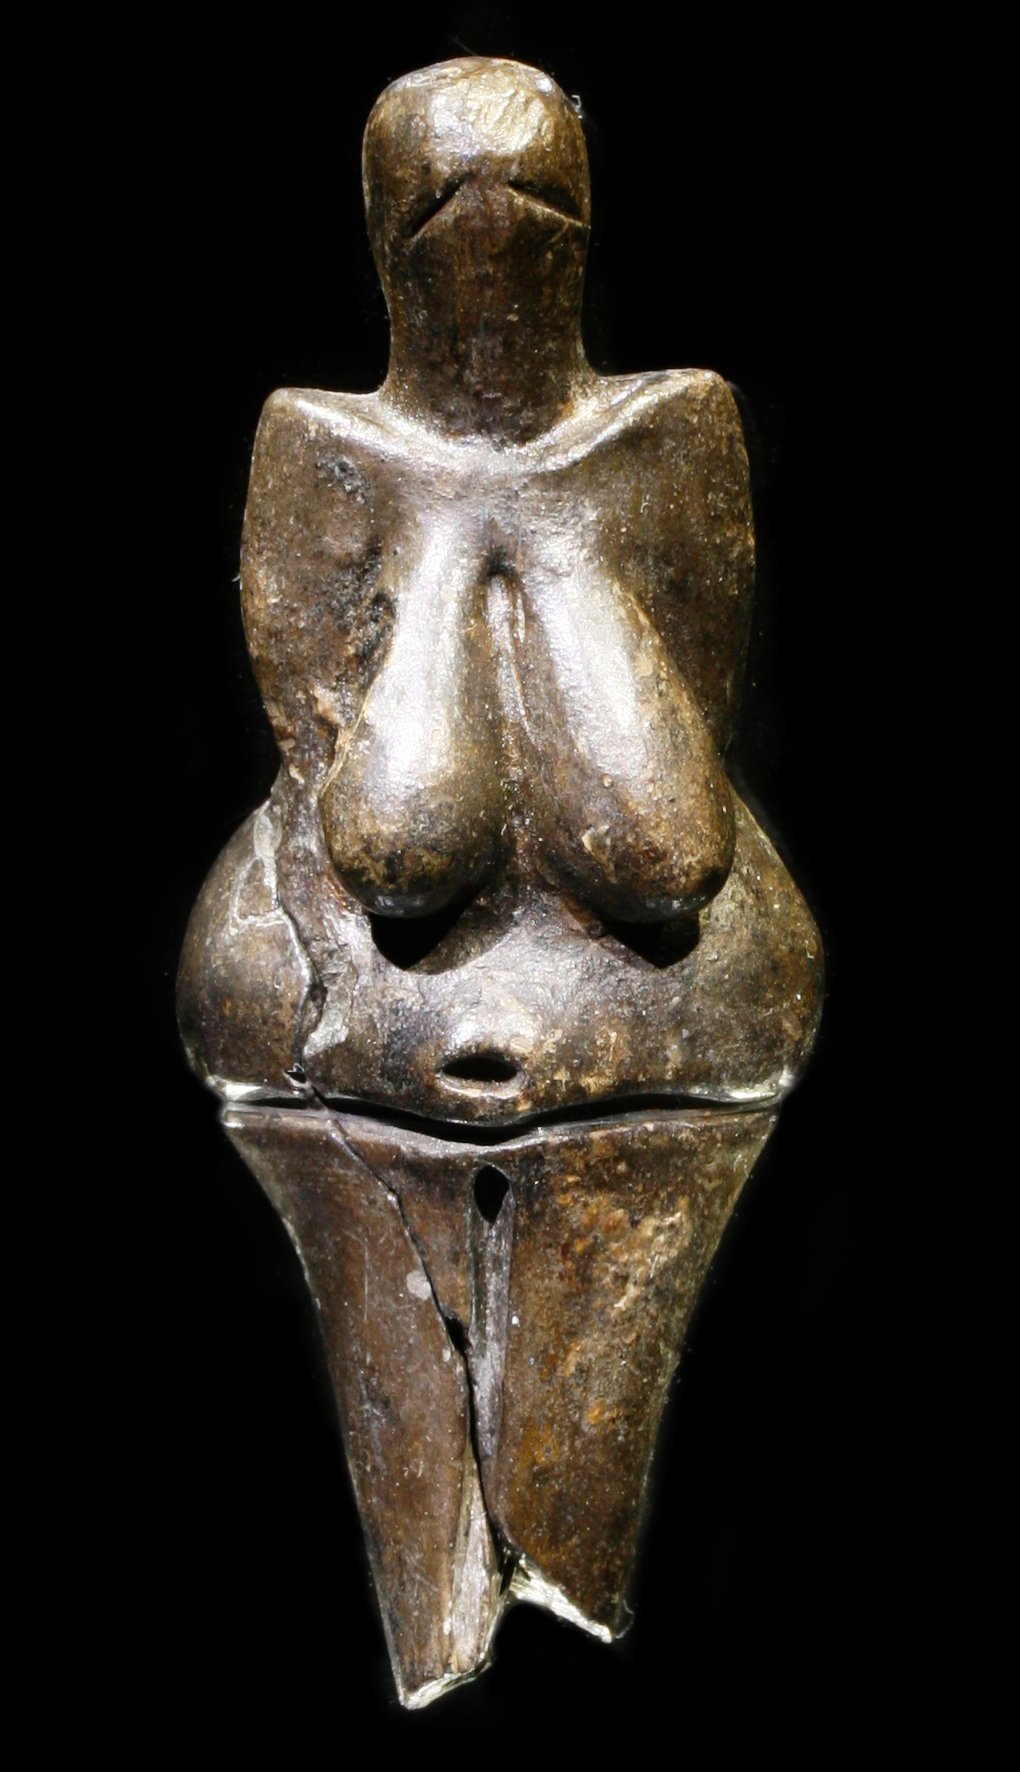 Venus of Dolni Vestonice, an 11 centimeter tall sculpture representing a curvaceous nude female, believed to symbolize fertility or serve as a 'goddess' figure.